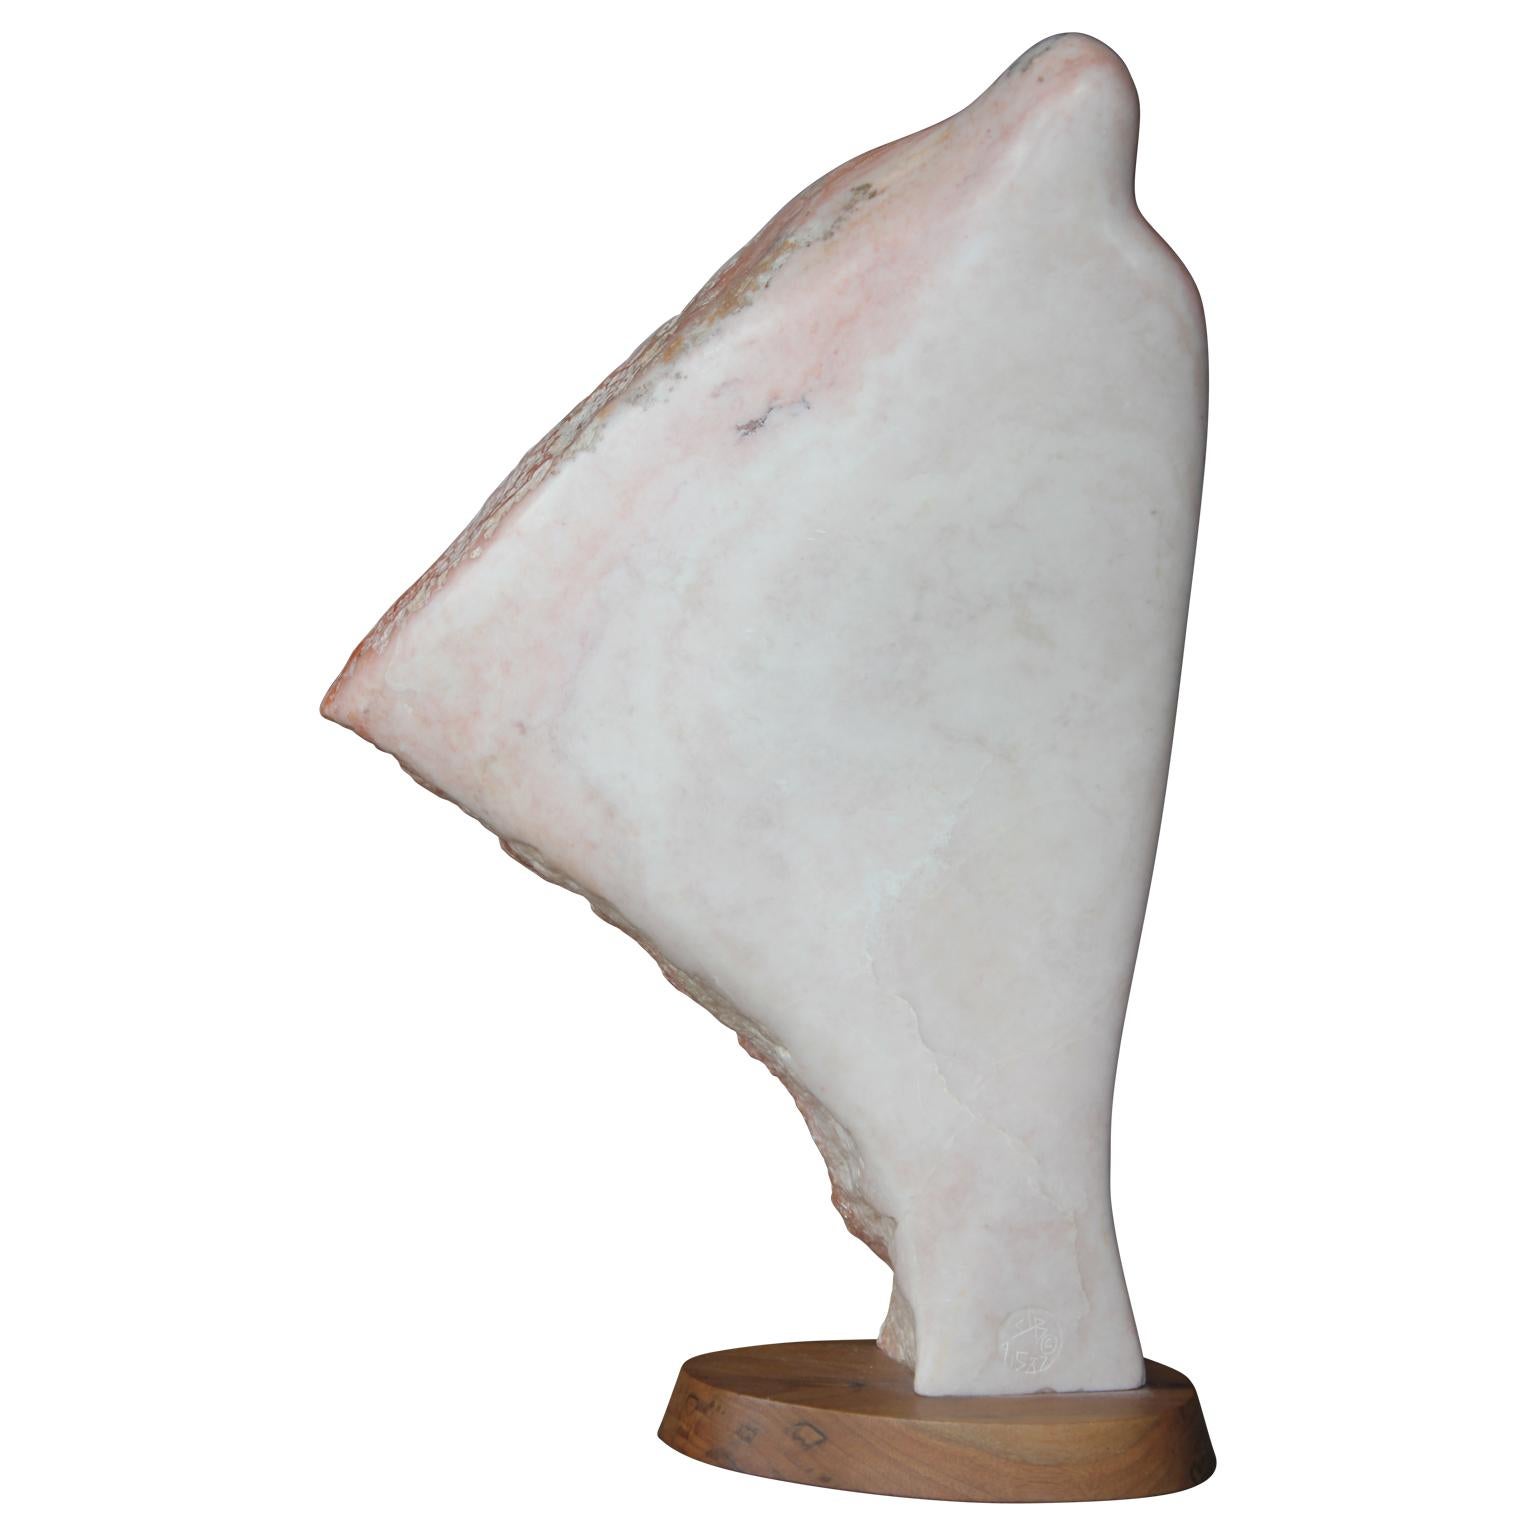 A delicately sculpted native New Mexico pink marble sculpture of a hooded figure draped in a cloak. Attached to a dark wooden base which compliments the beautiful pink tones of the sculpture.

